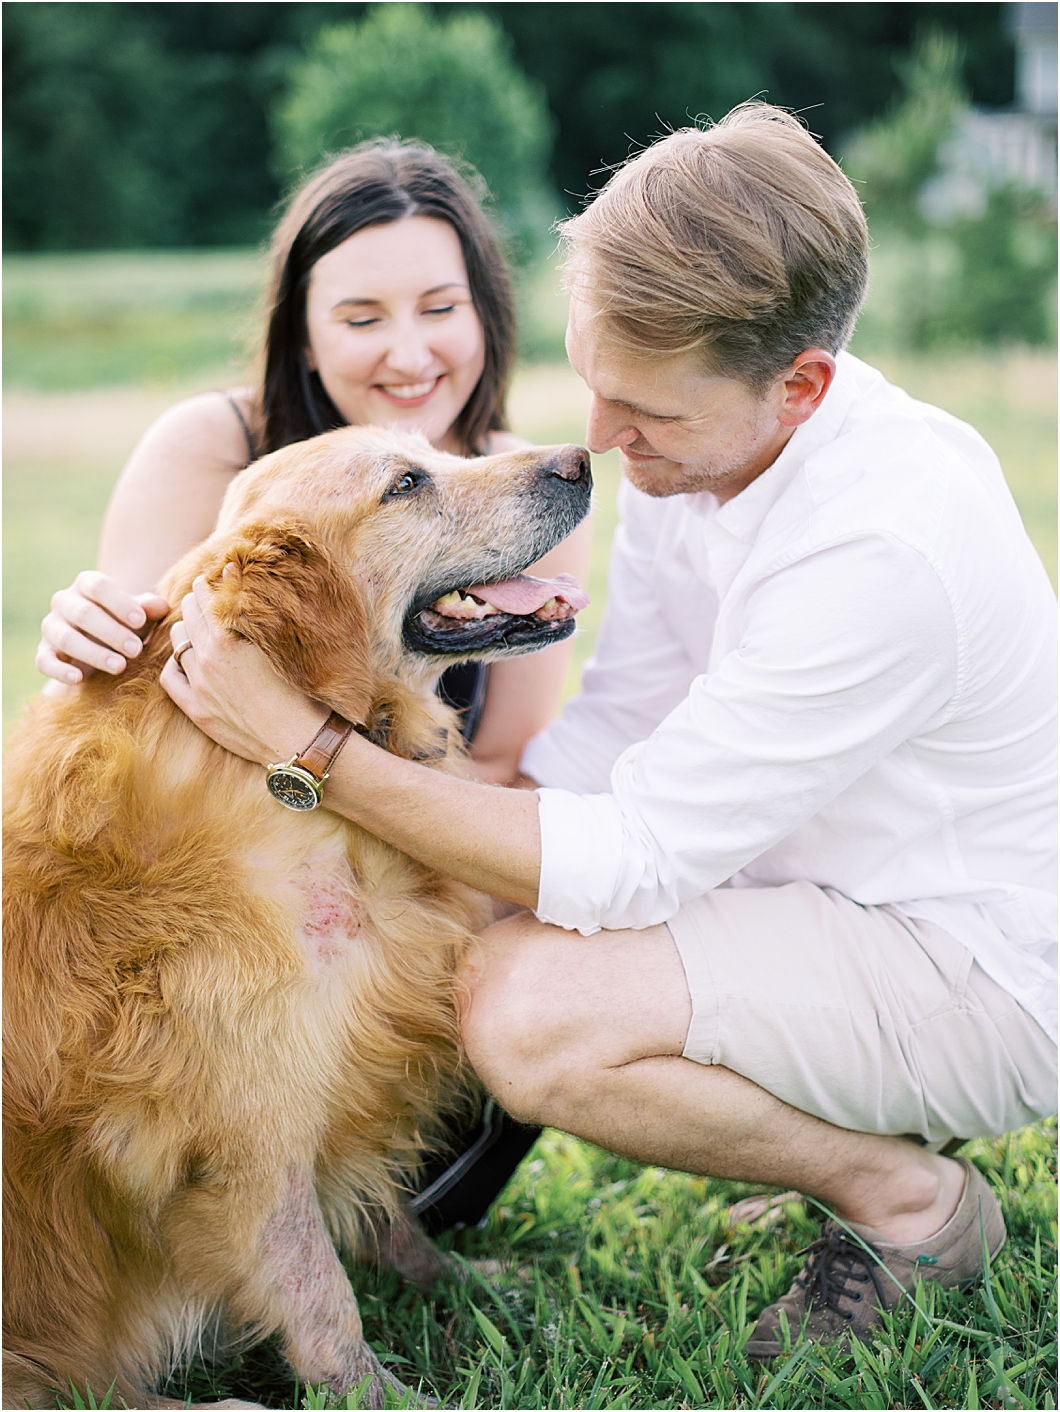 At Home Anniversary Photos with Dogs by Hillary Muelleck